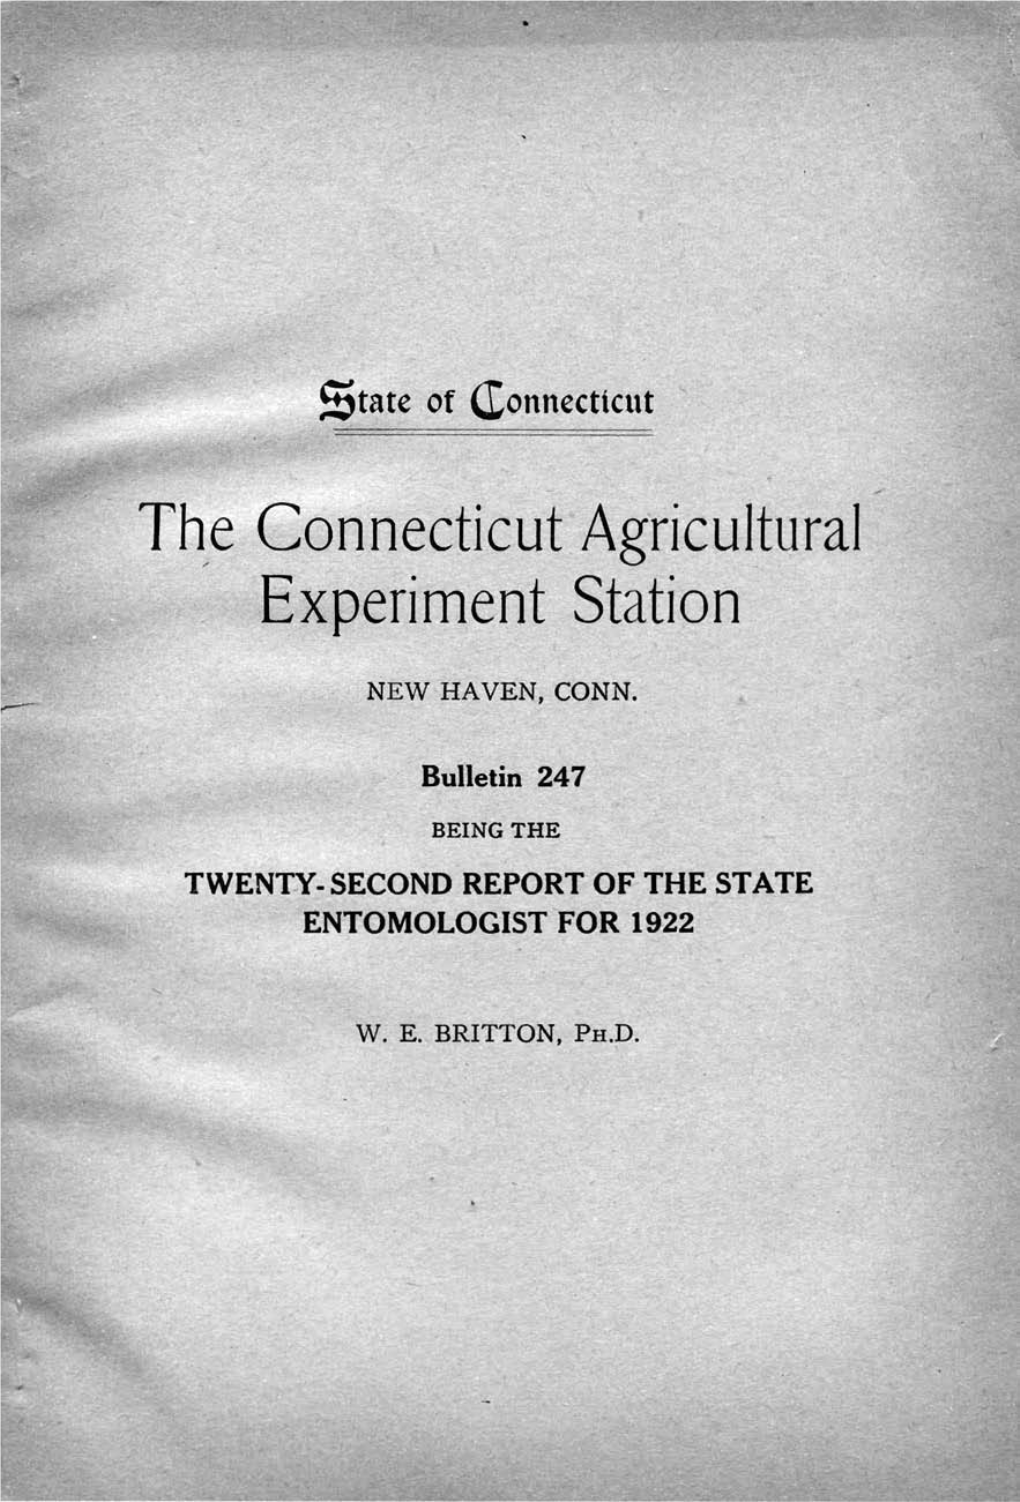 The Connecticut Agricultural Experiment Station